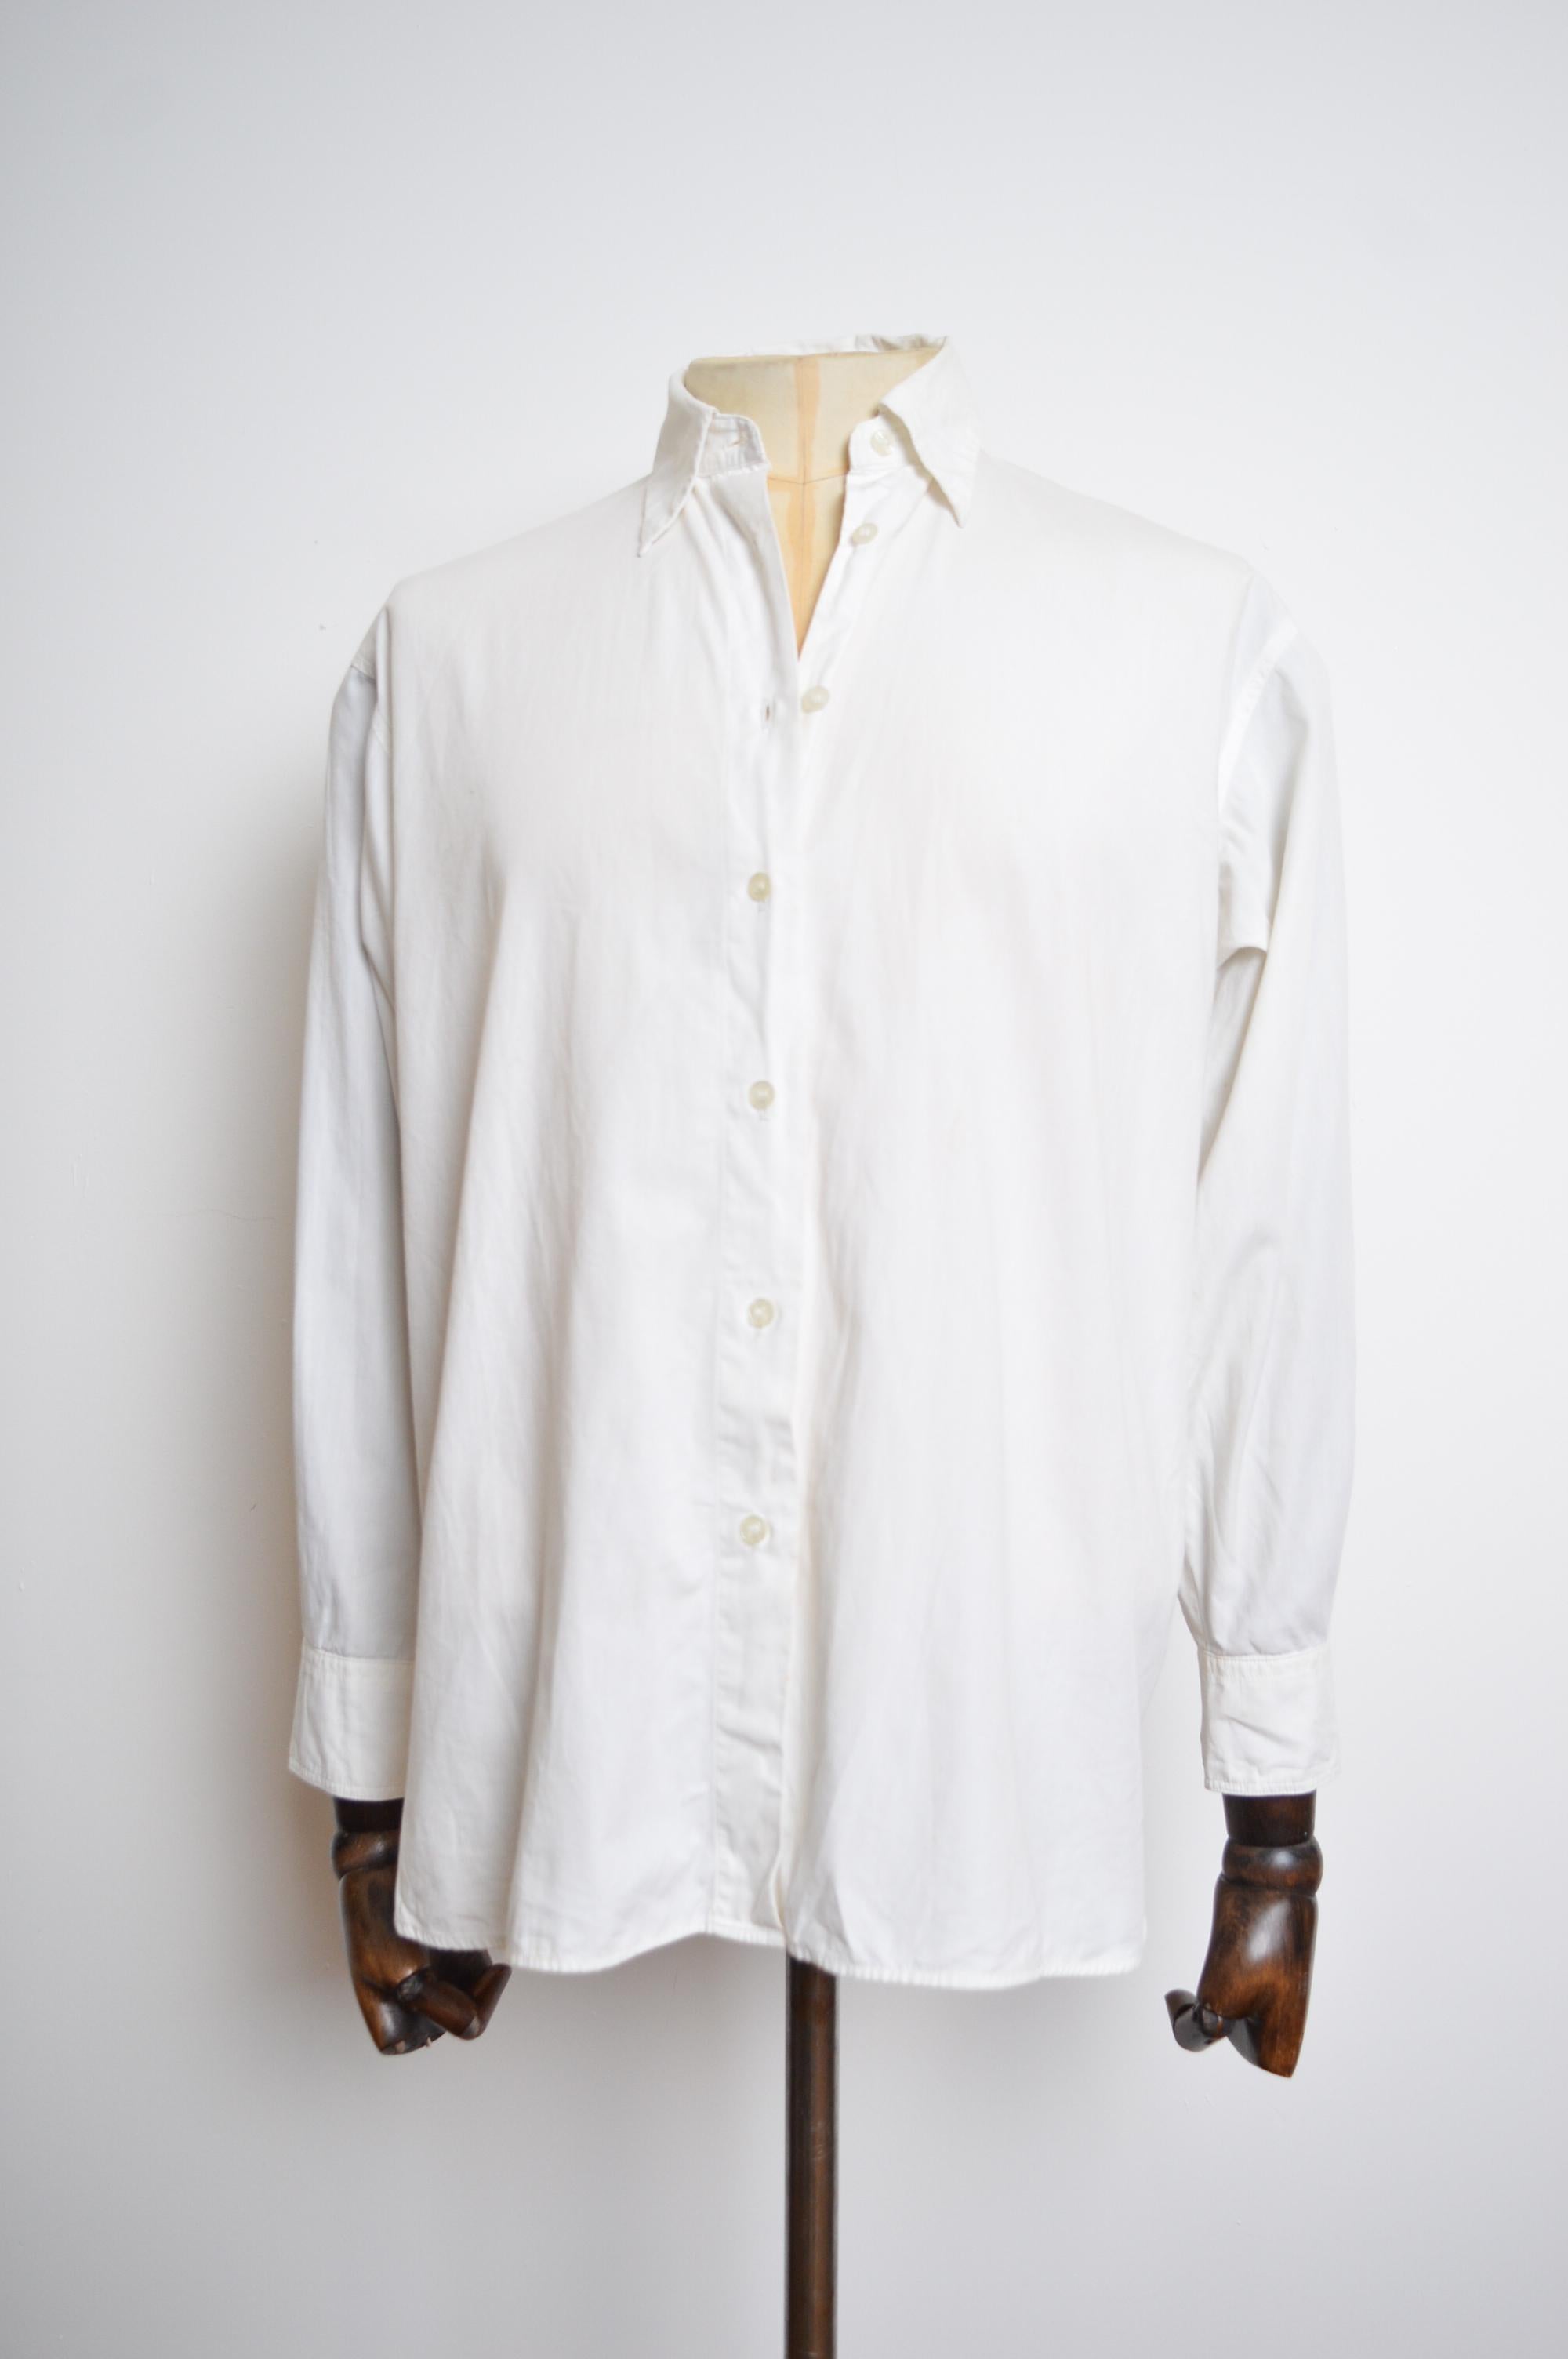 Men's 1990's Vintage MOSCHINO Nature Print Spell out White Cotton Summer shirt